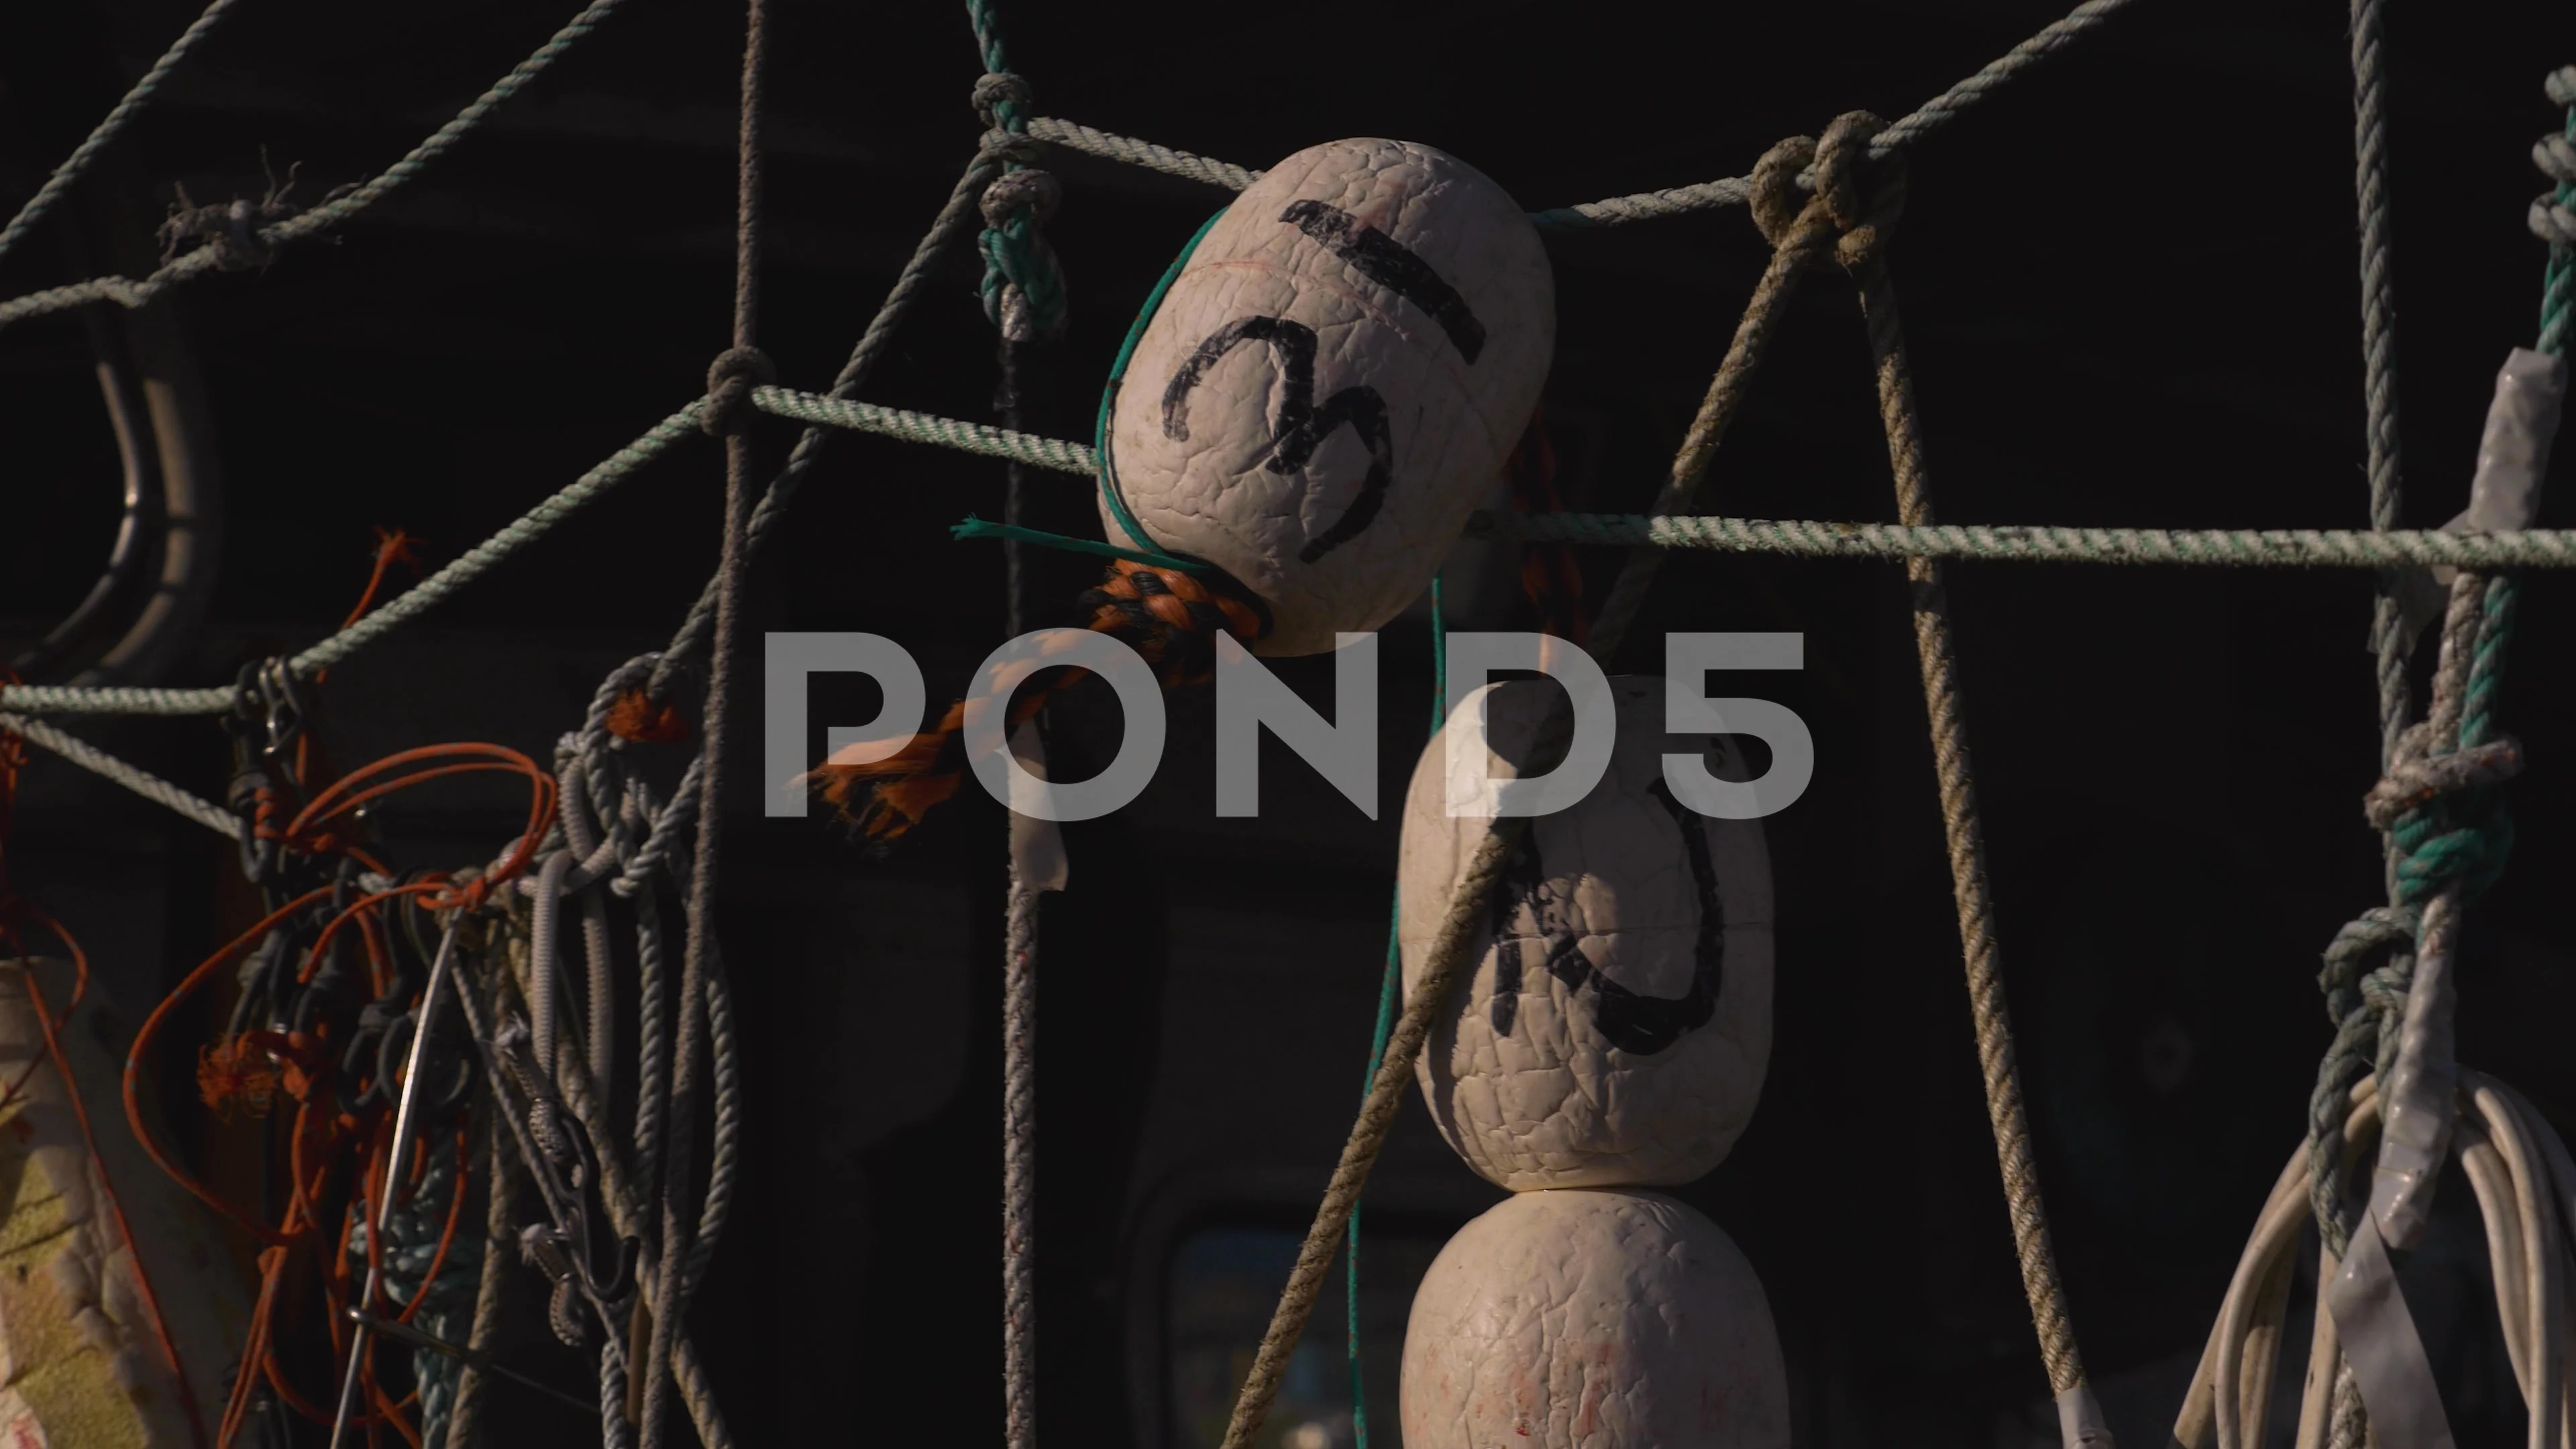 A Fishing Boat with fishing Nets and Buo, Stock Video